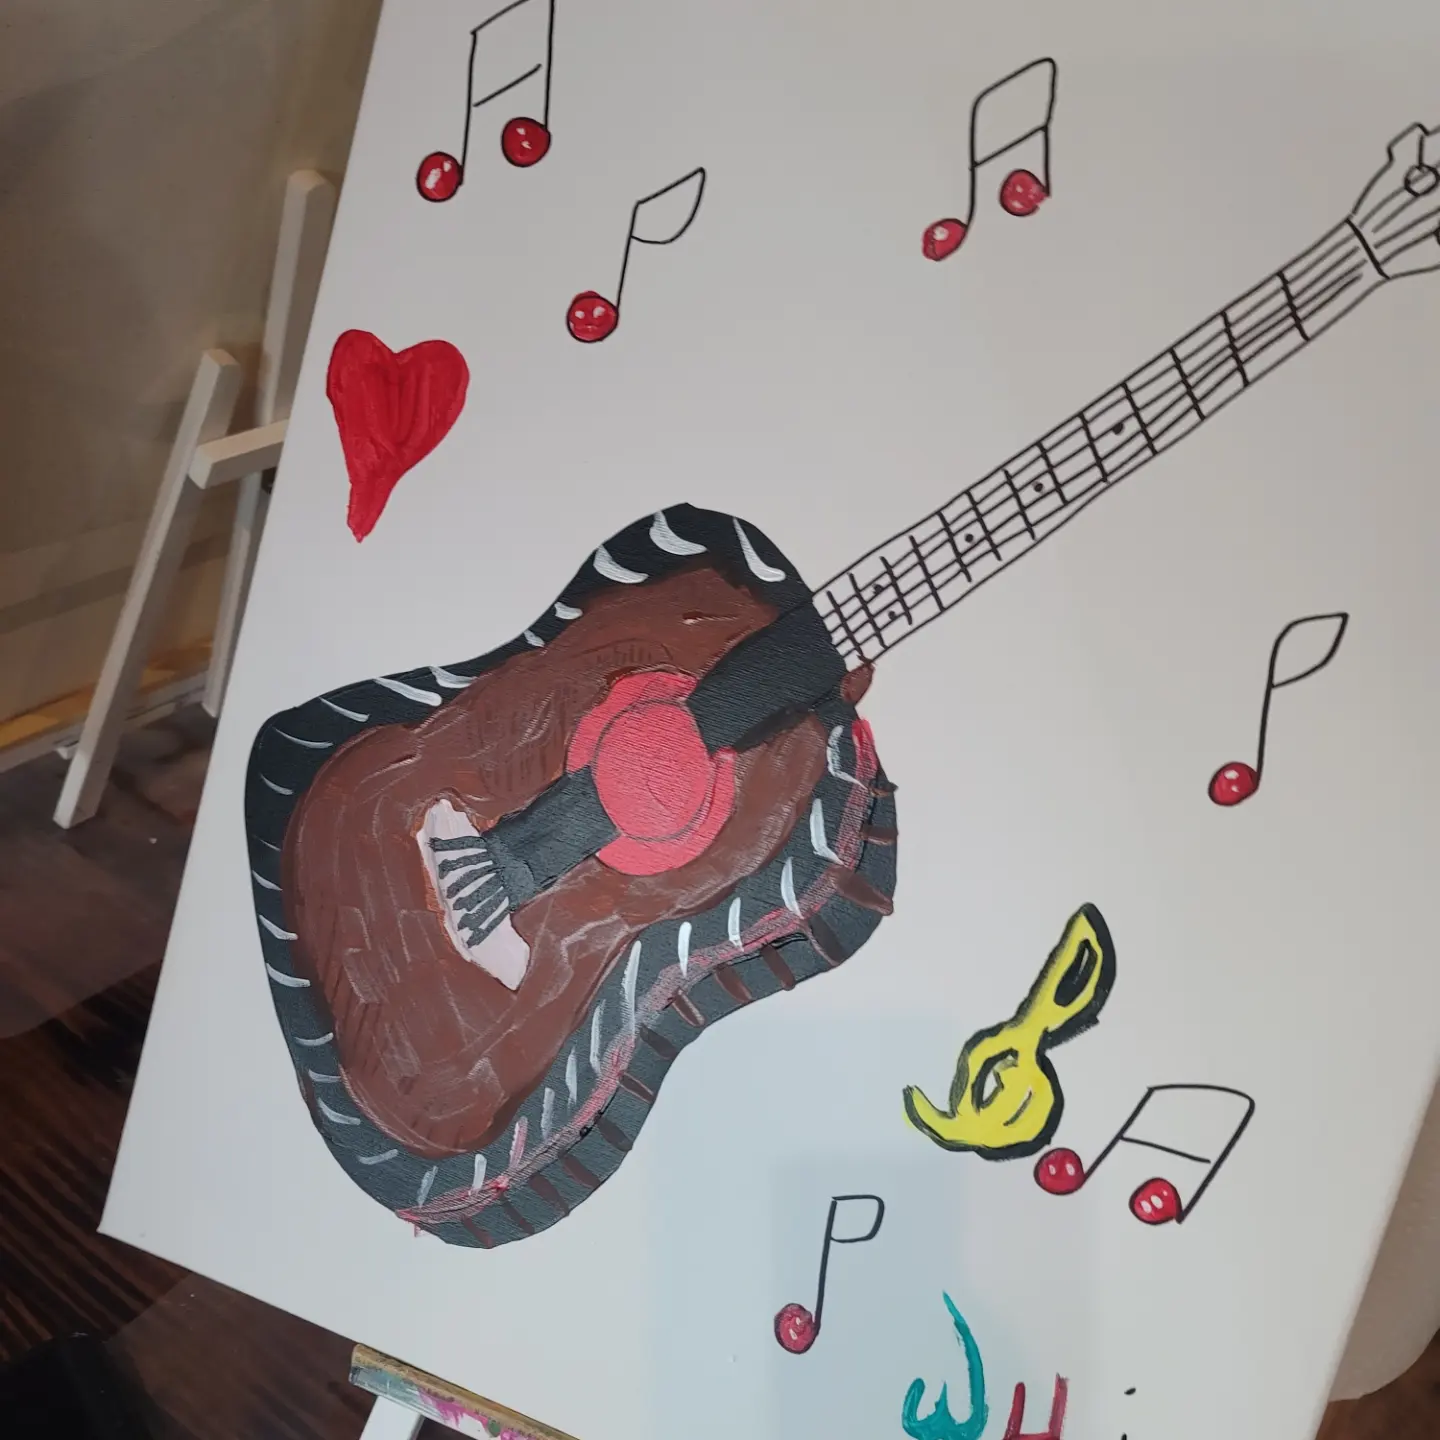 A guitar is painted on the canvas.